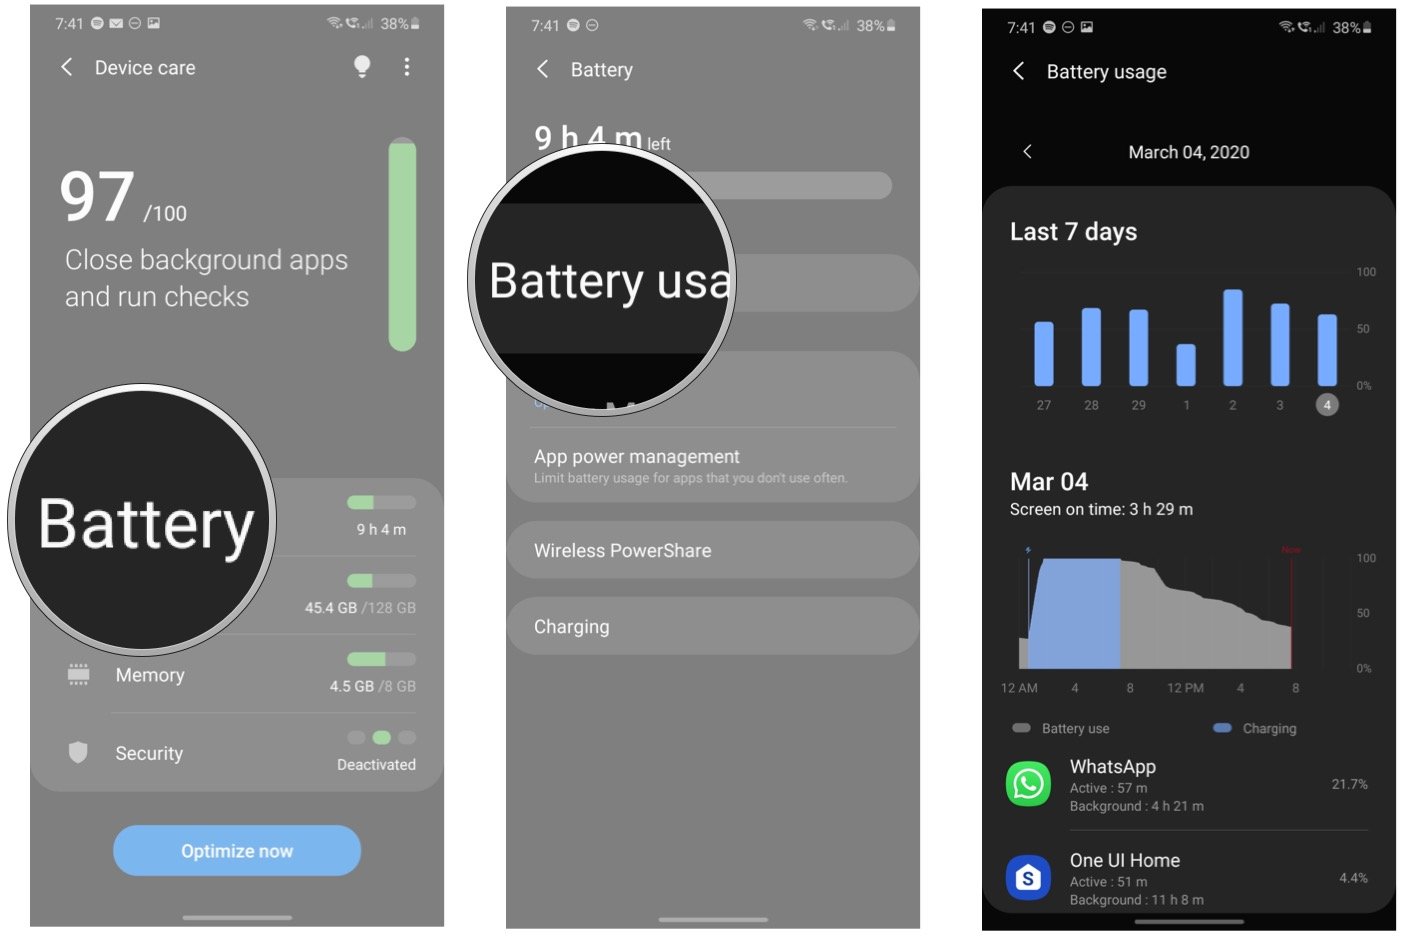 How to view battery usage statistics on the Galaxy S20